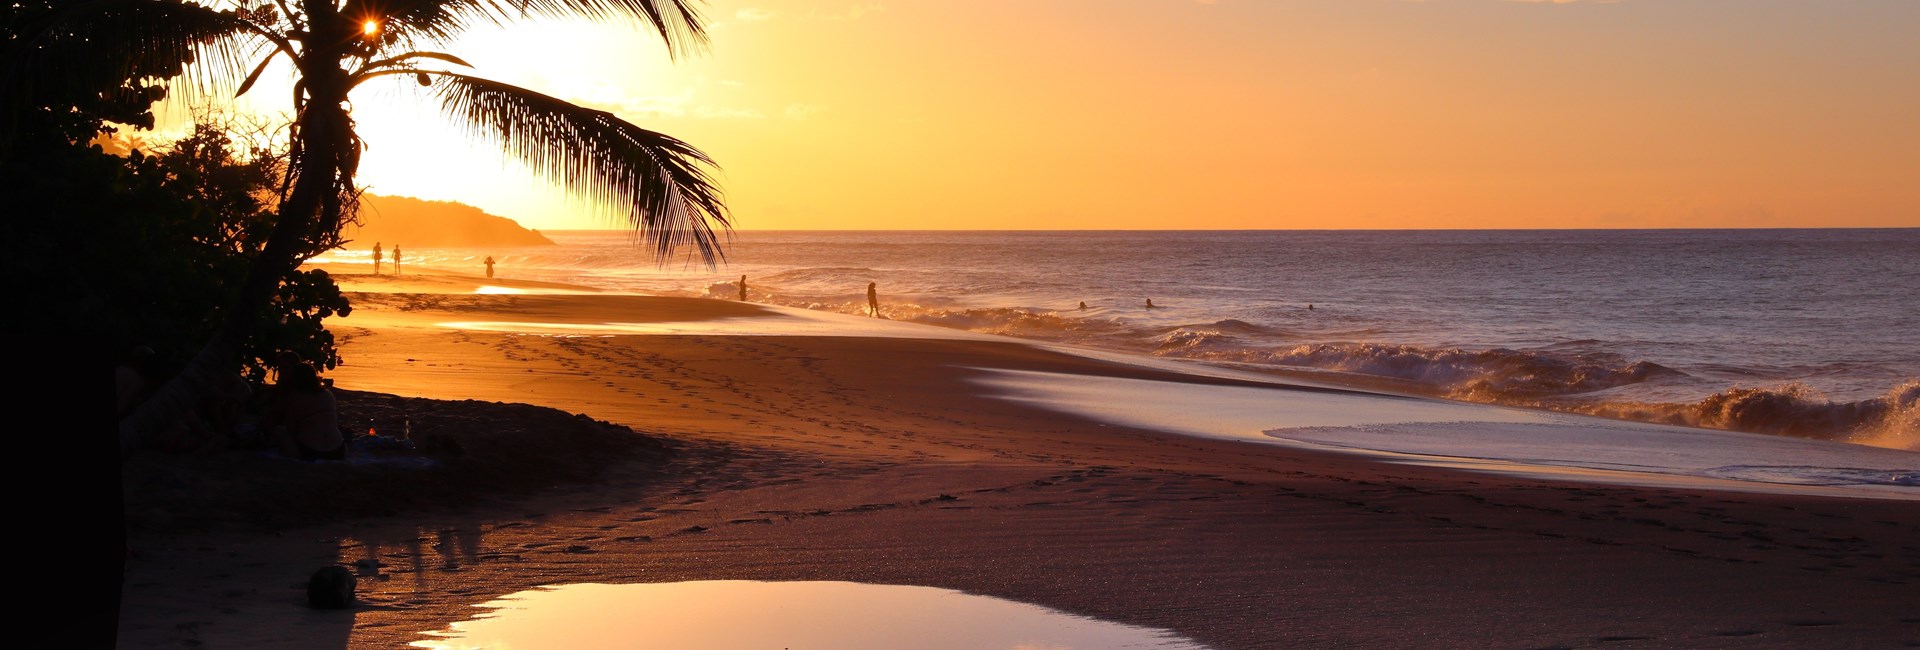 Orange sunset at a sandy tropical beach in Guadeloupe